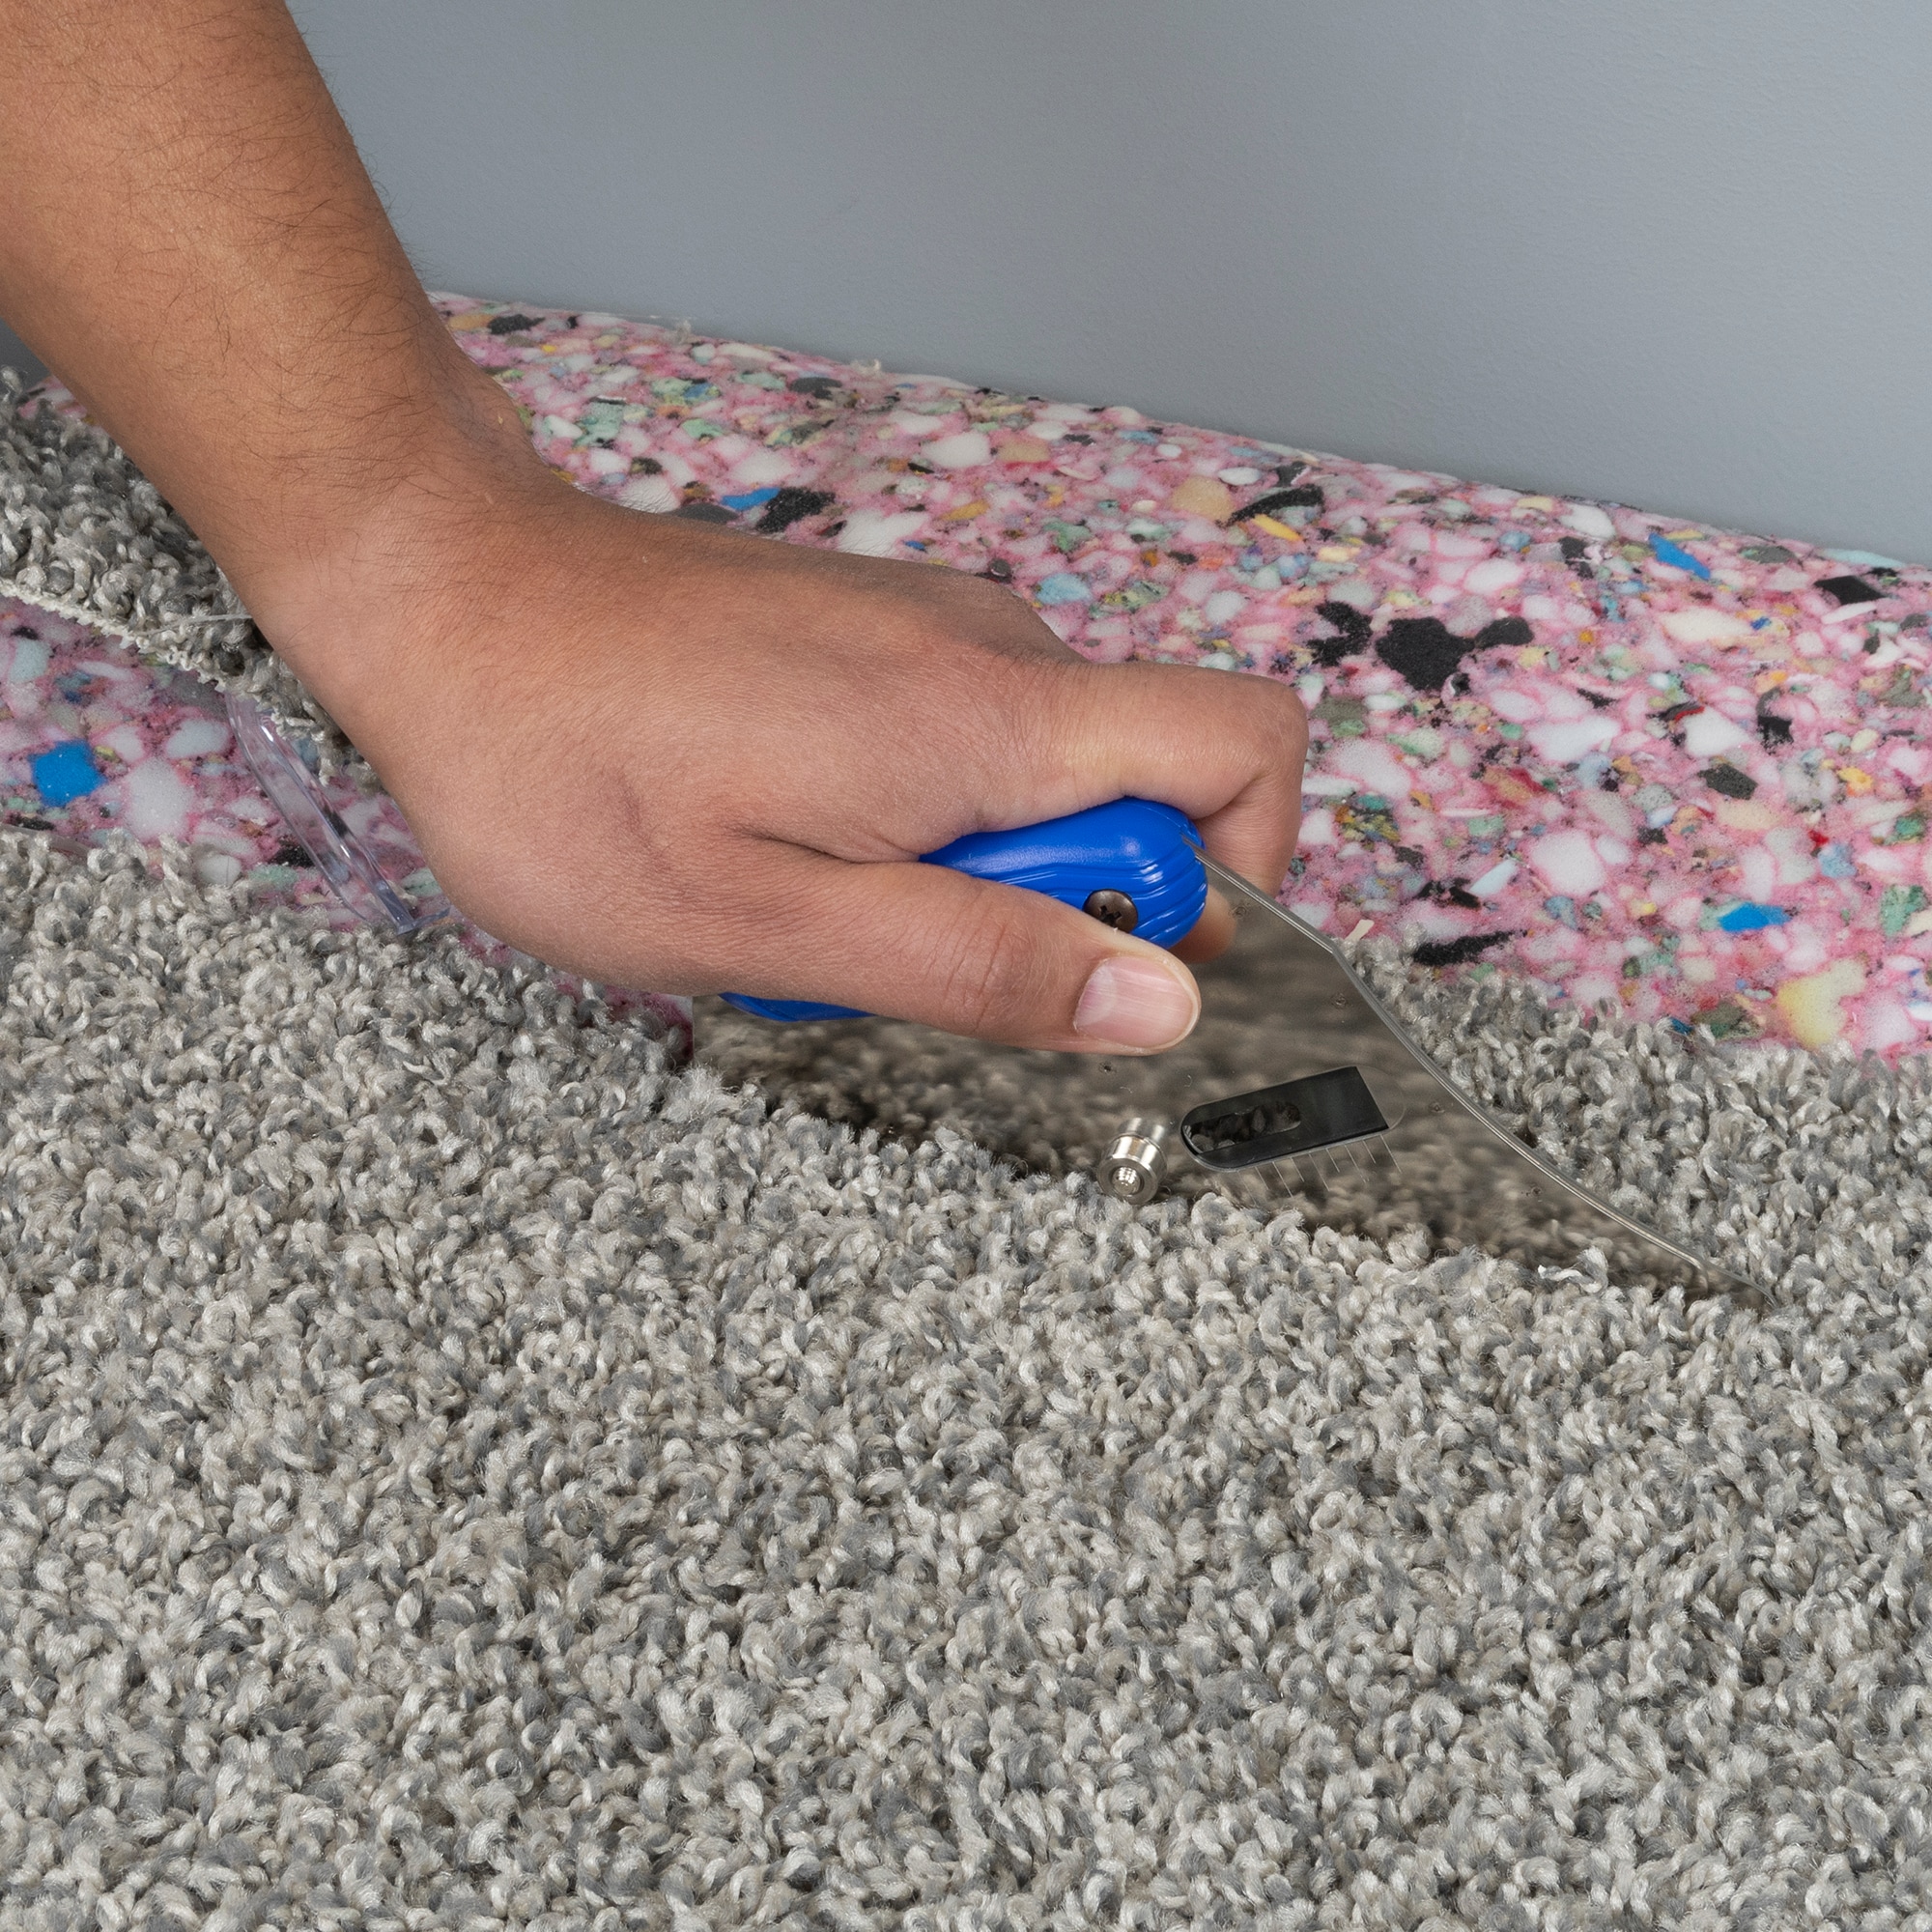 Carpet Cutter Placed on a New Carpet. Stock Image - Image of finishing,  cutting: 255615165